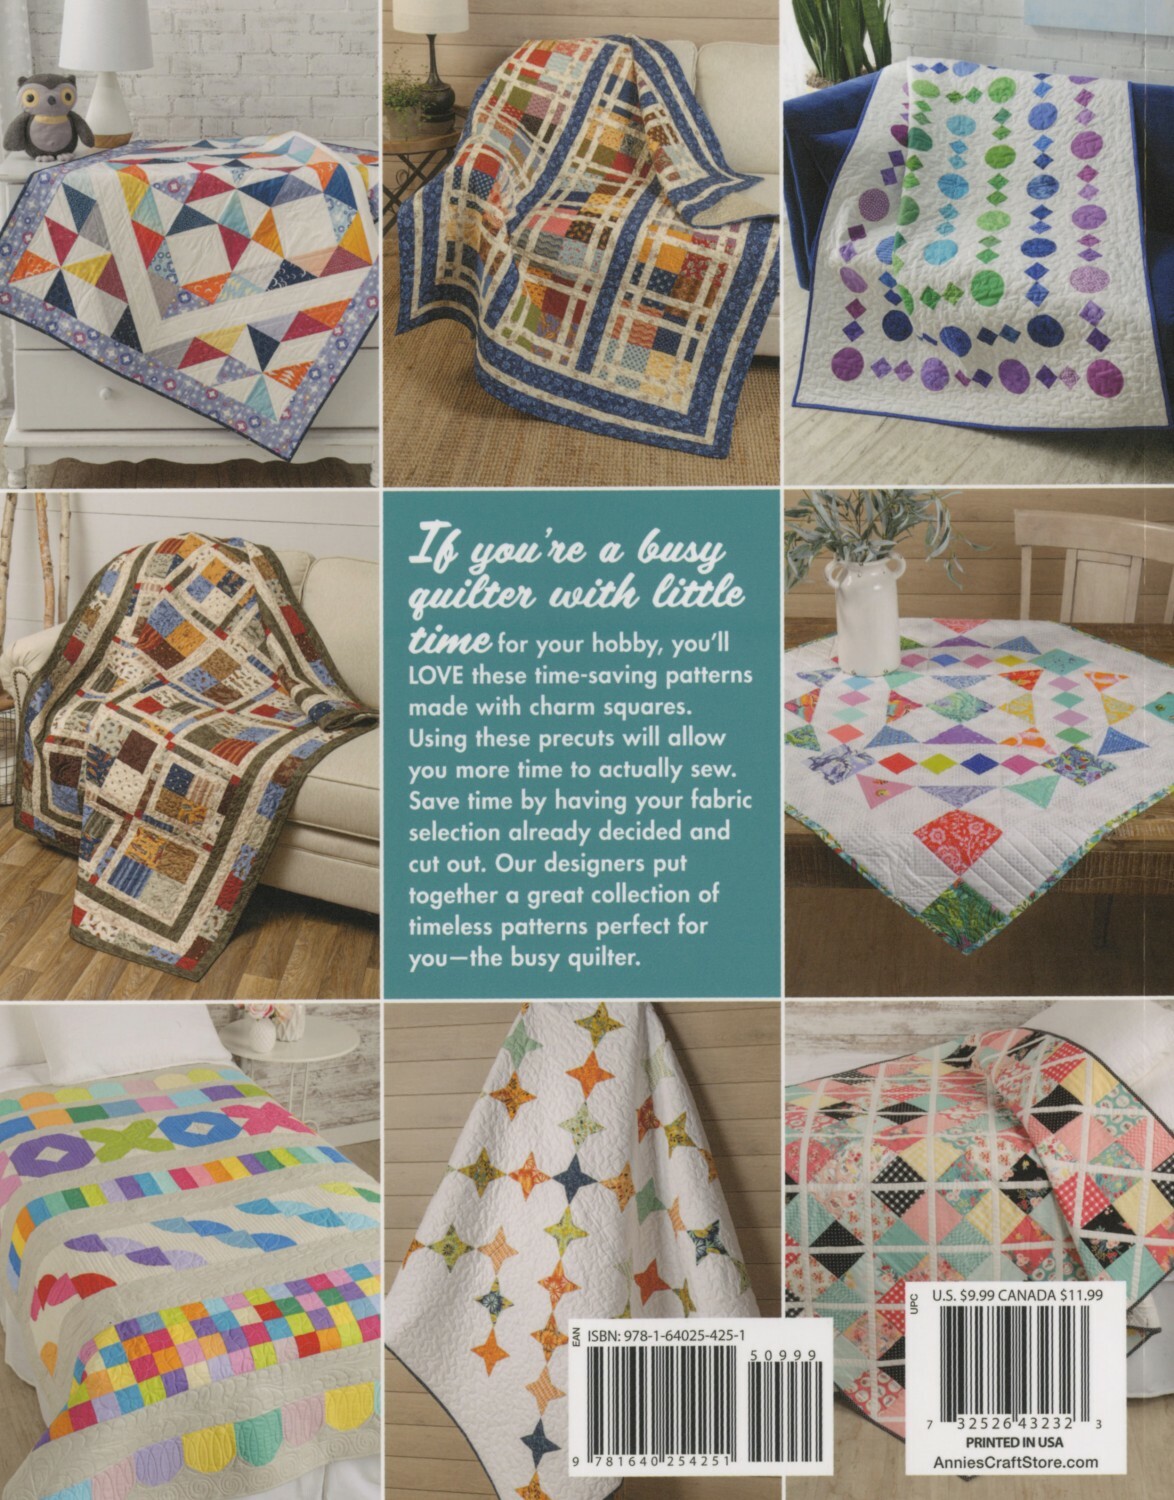 Time Saving Charm Quilts Book